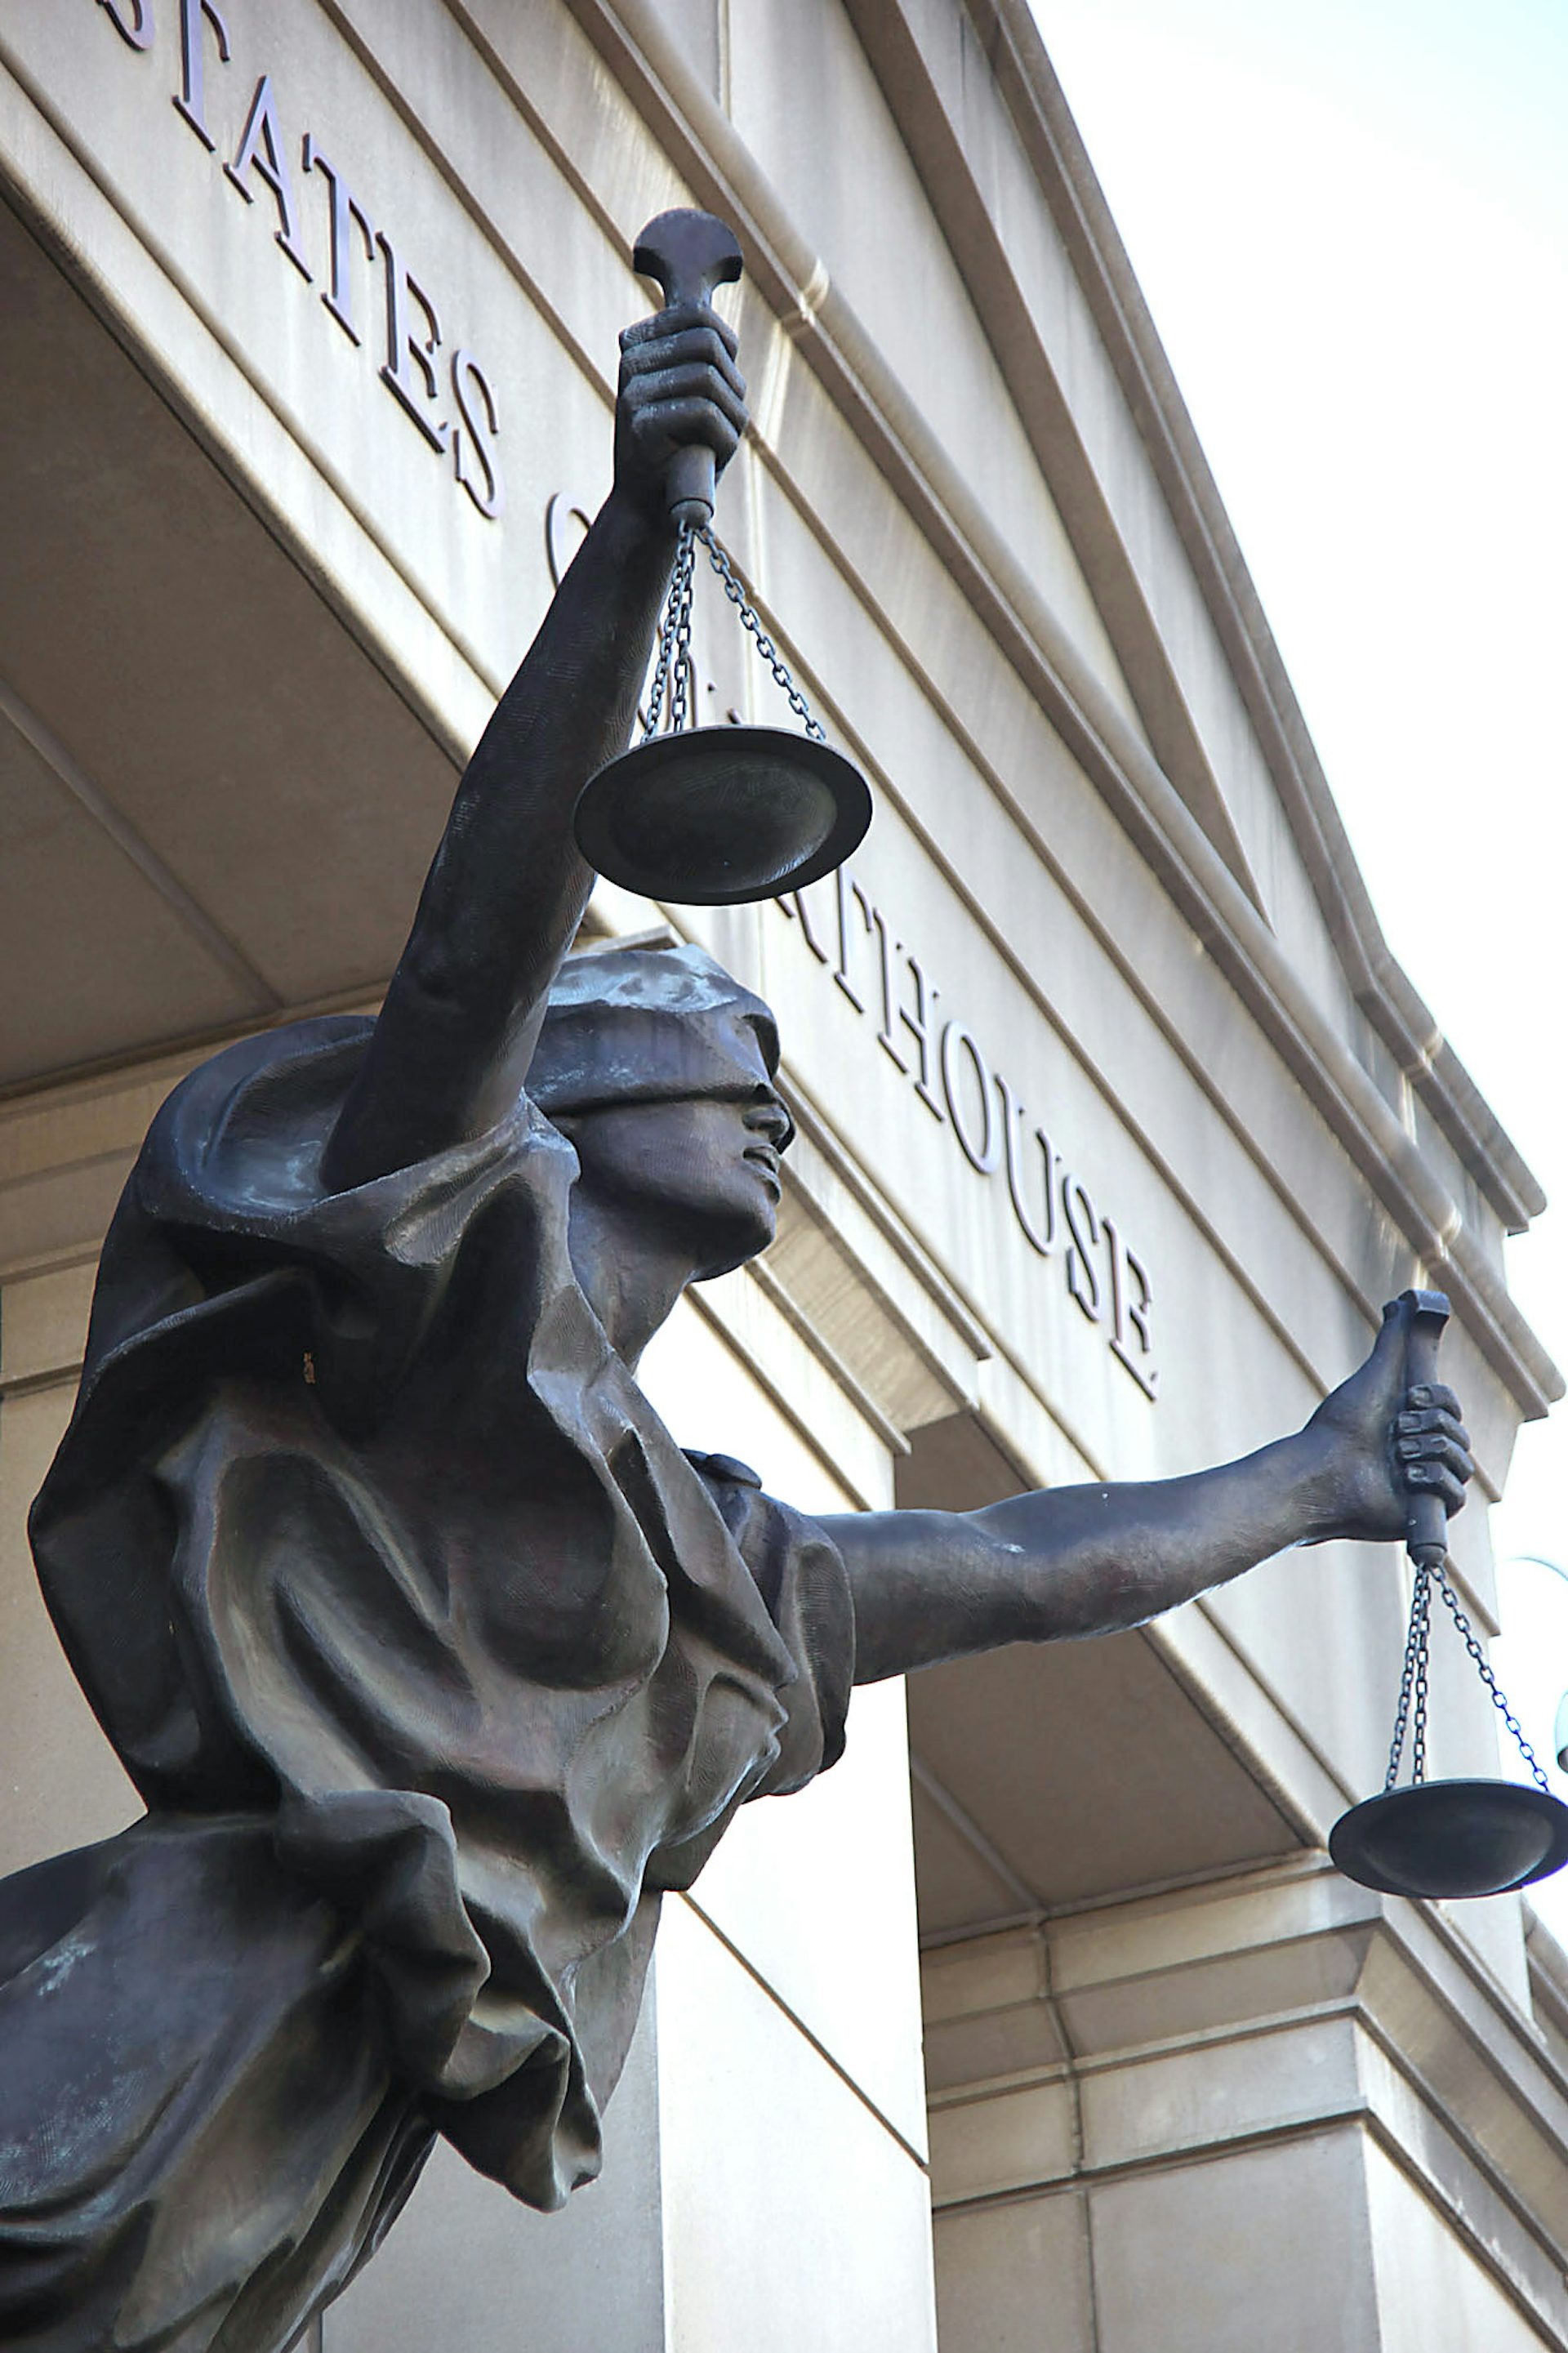 Lady Justice statue at Albert V Bryan United States Courthouse